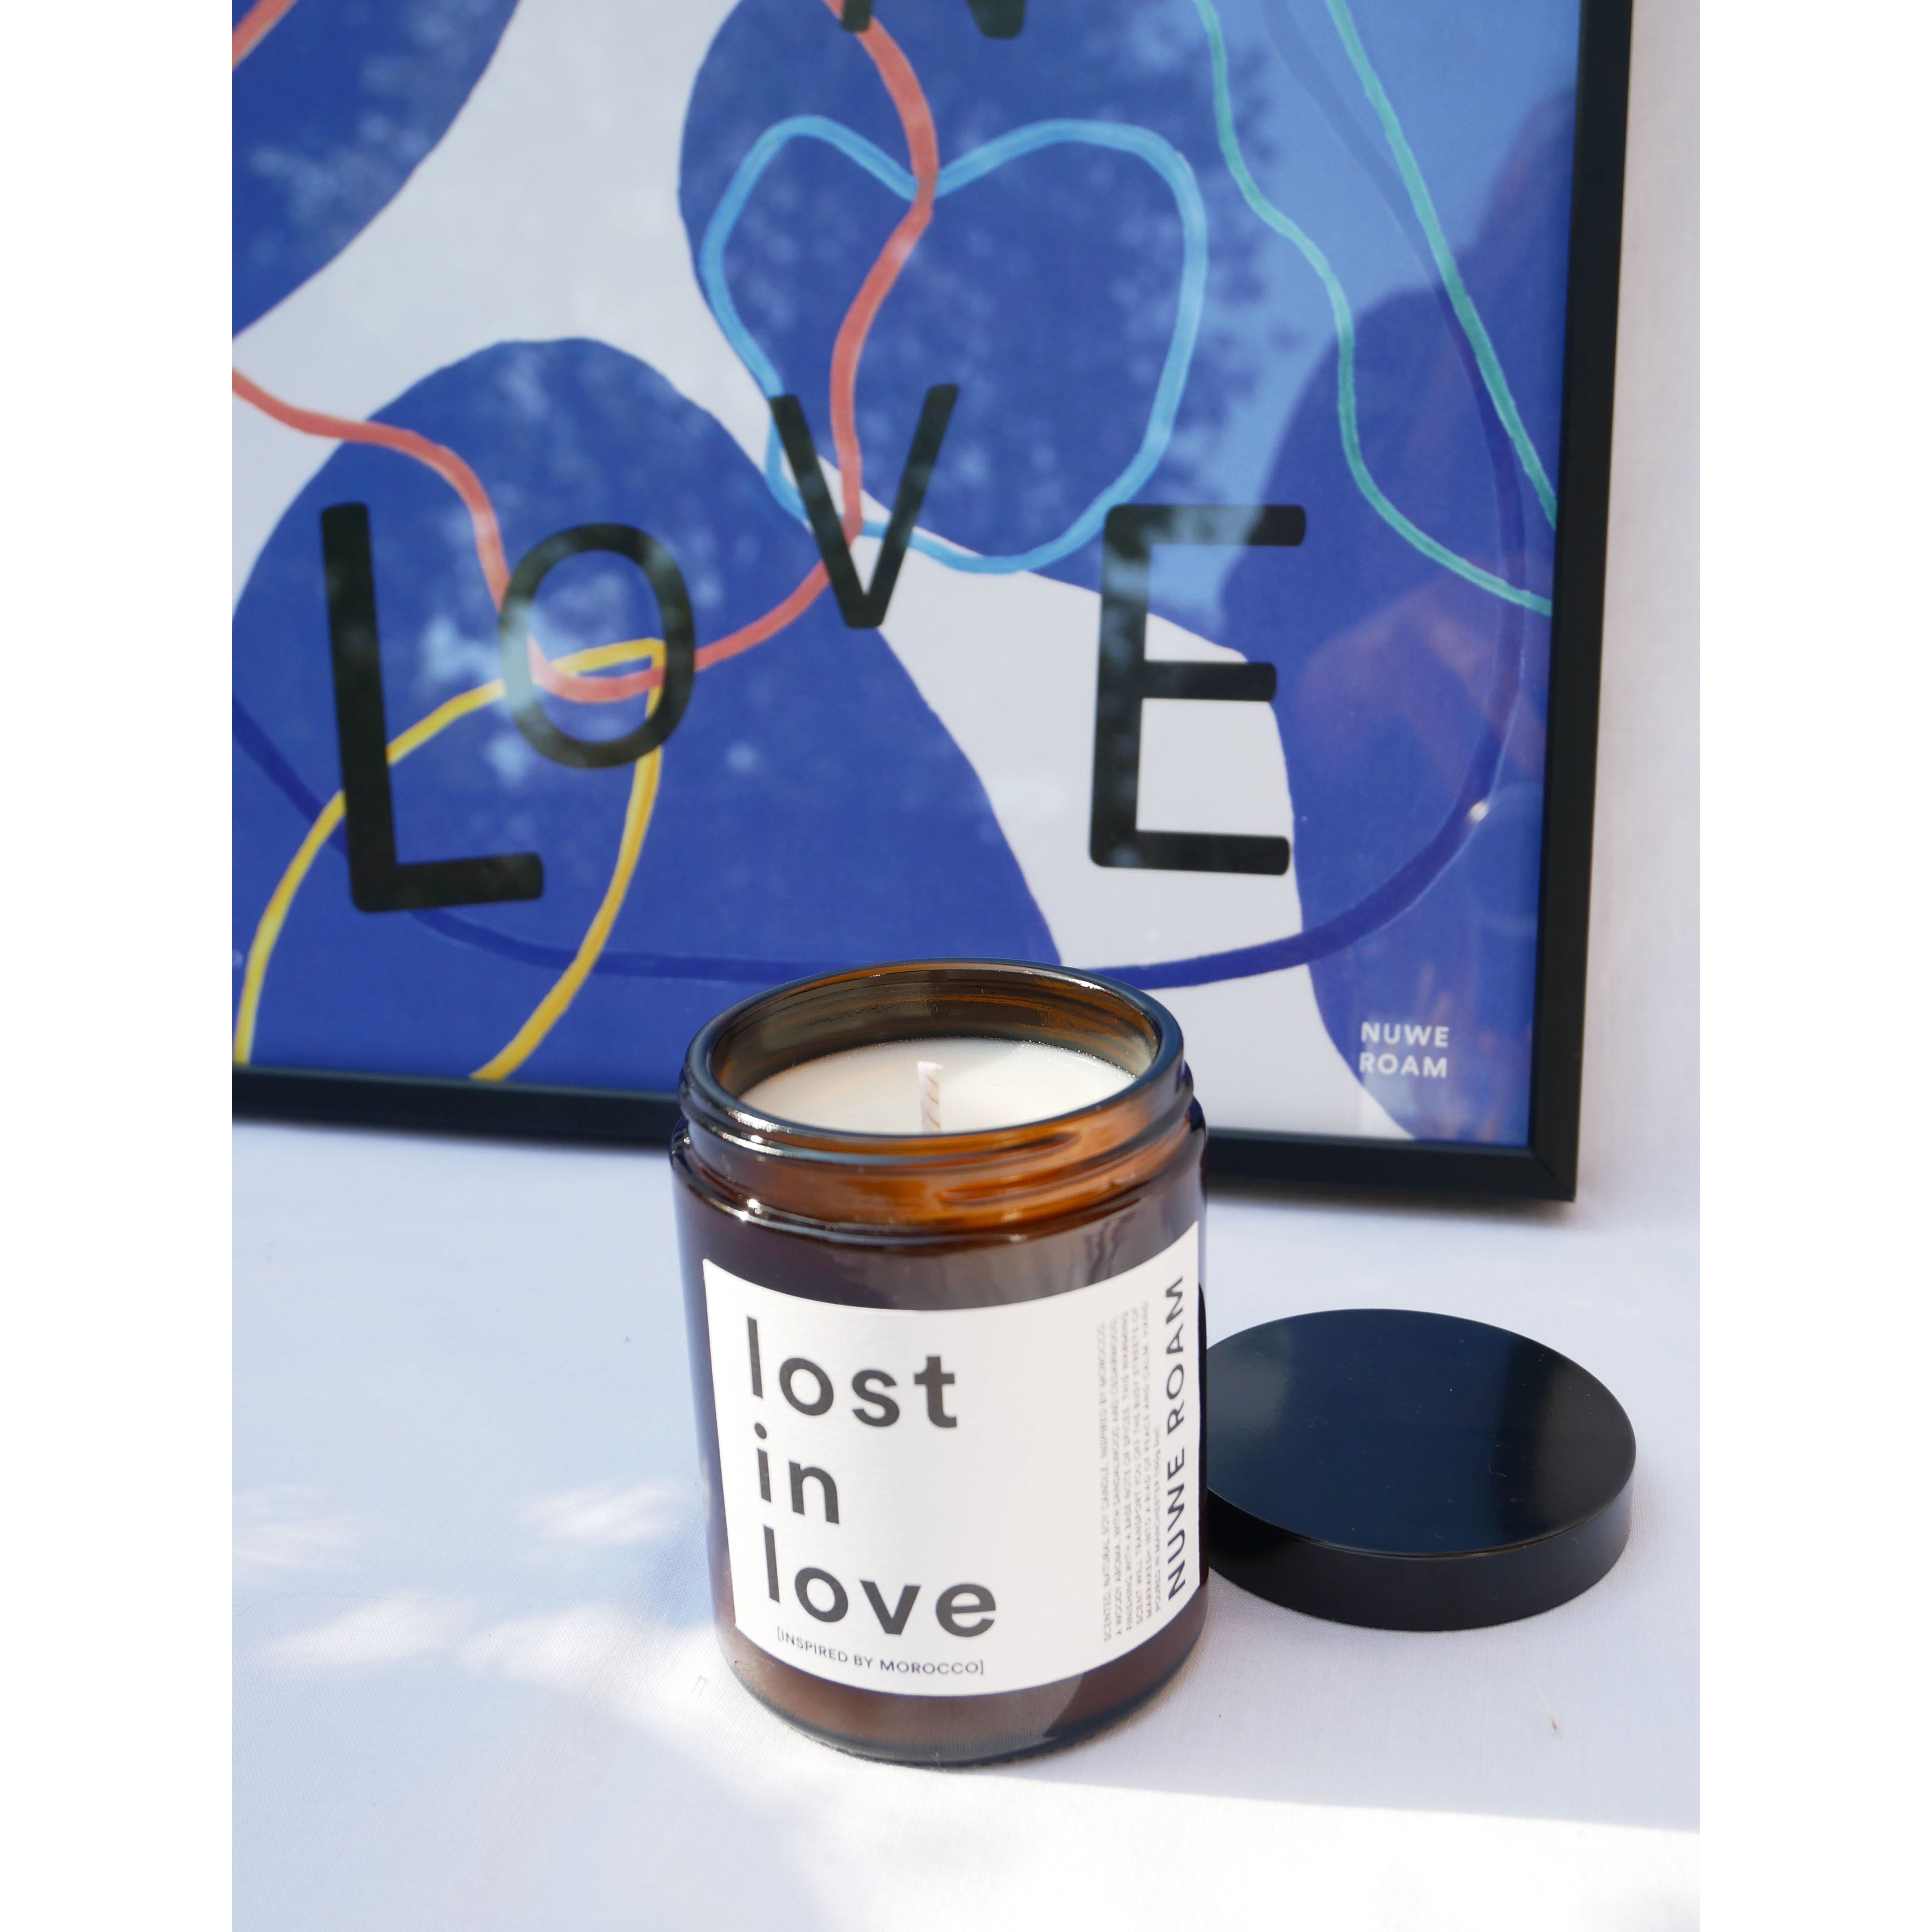 'LOST IN LOVE' SANDALWOOD SCENTED CANDLE